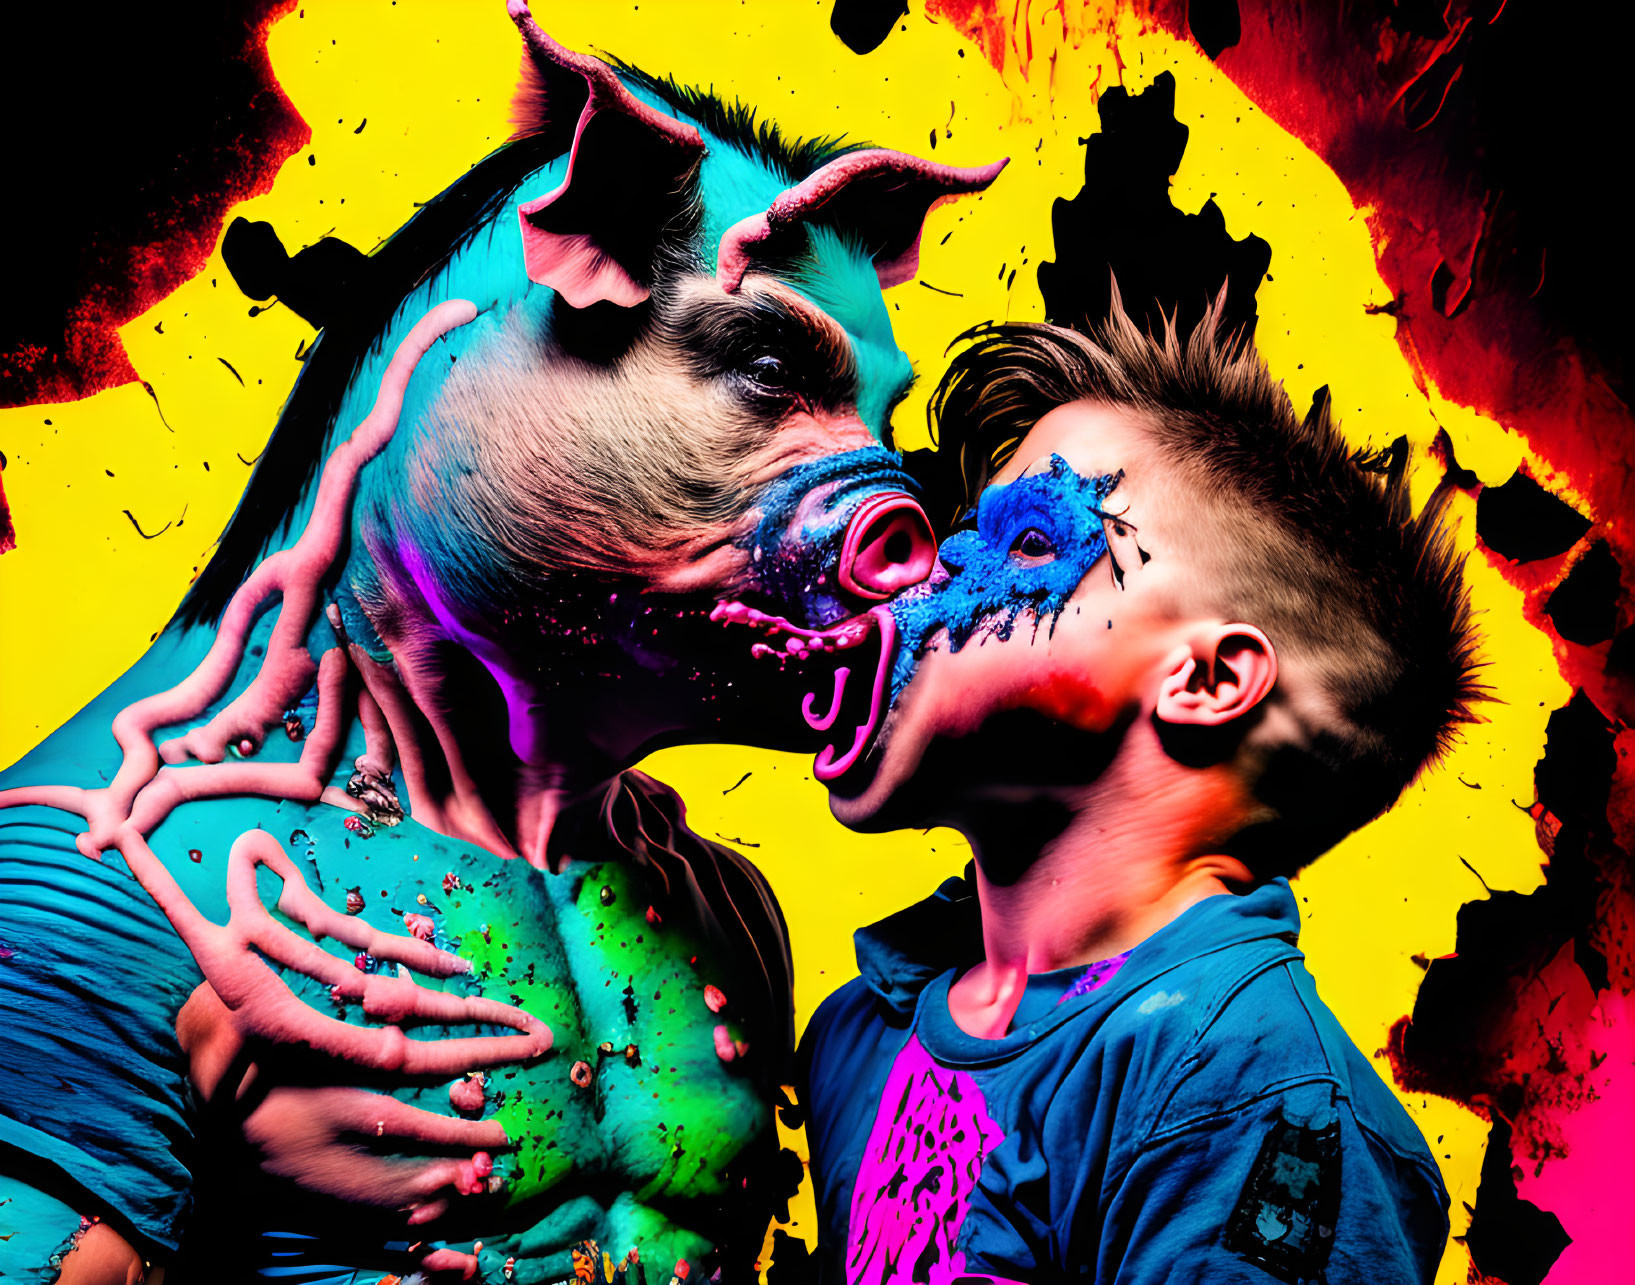 Artwork of person with pig's head and child with colorful splashes in intimate pose.